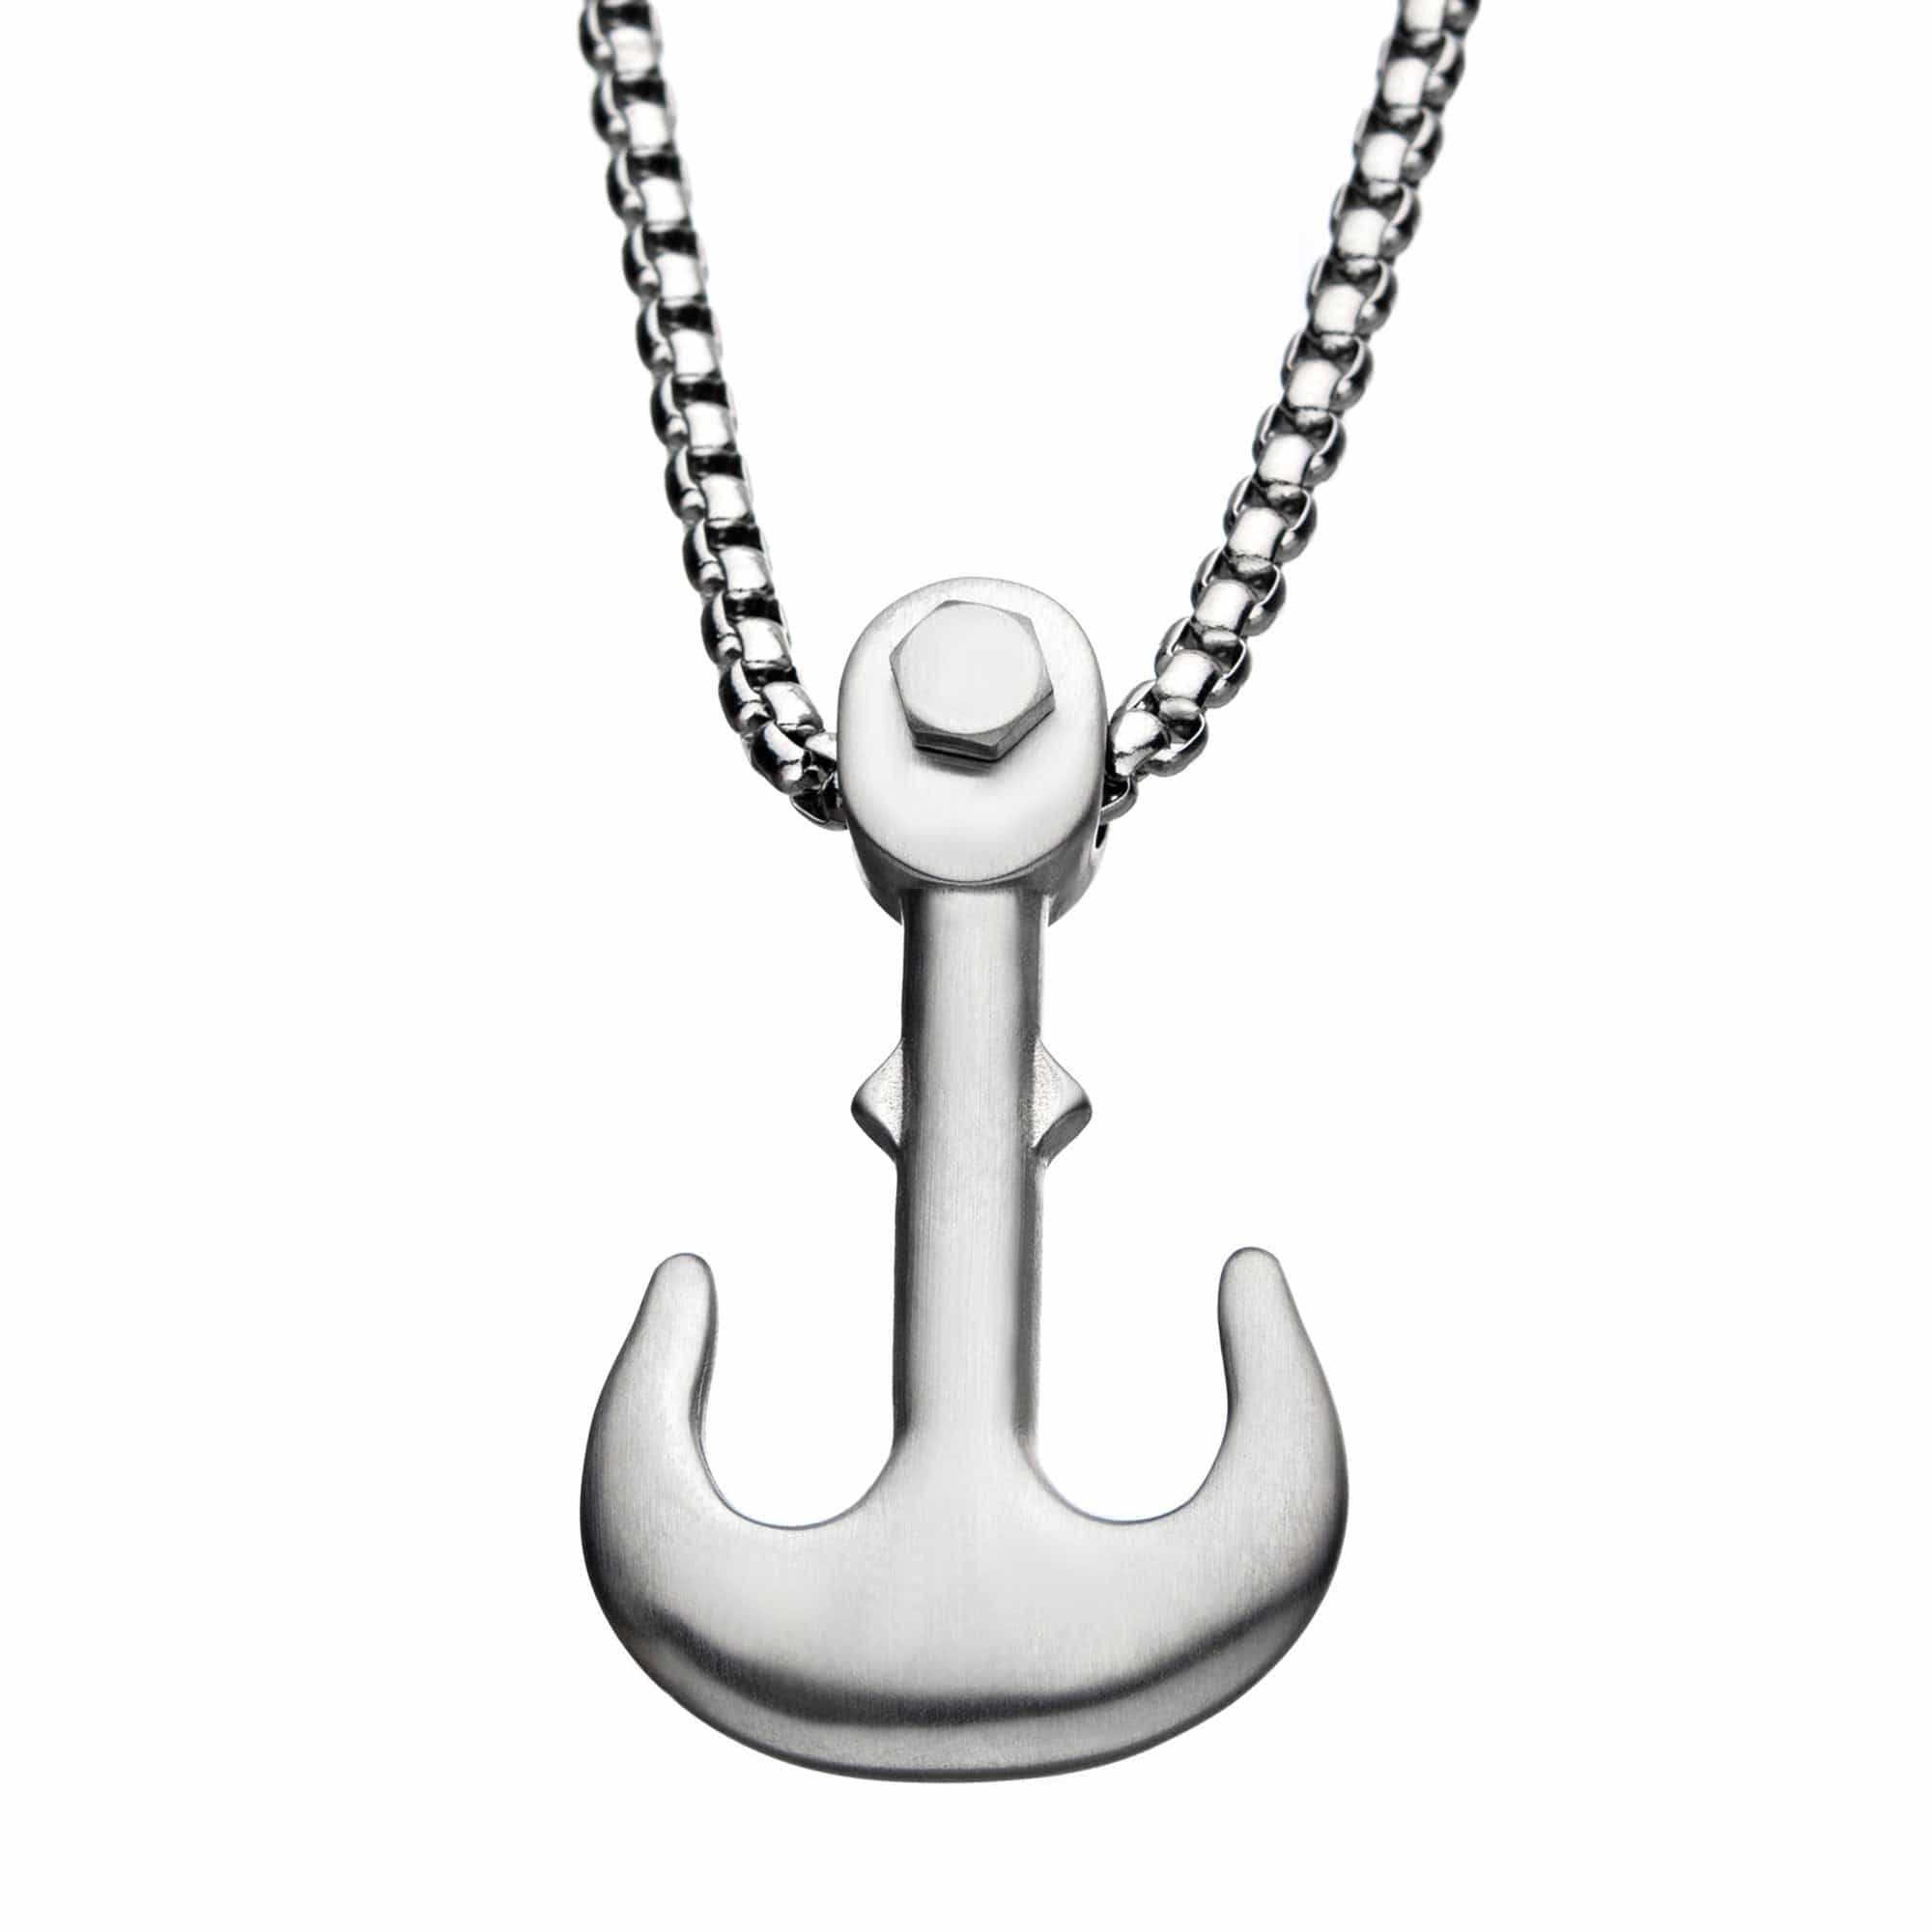 INOX JEWELRY Pendants Silver Tone Stainless Steel Matte Finish Man of War Anchor Pendant with Chain SSP004MNK1